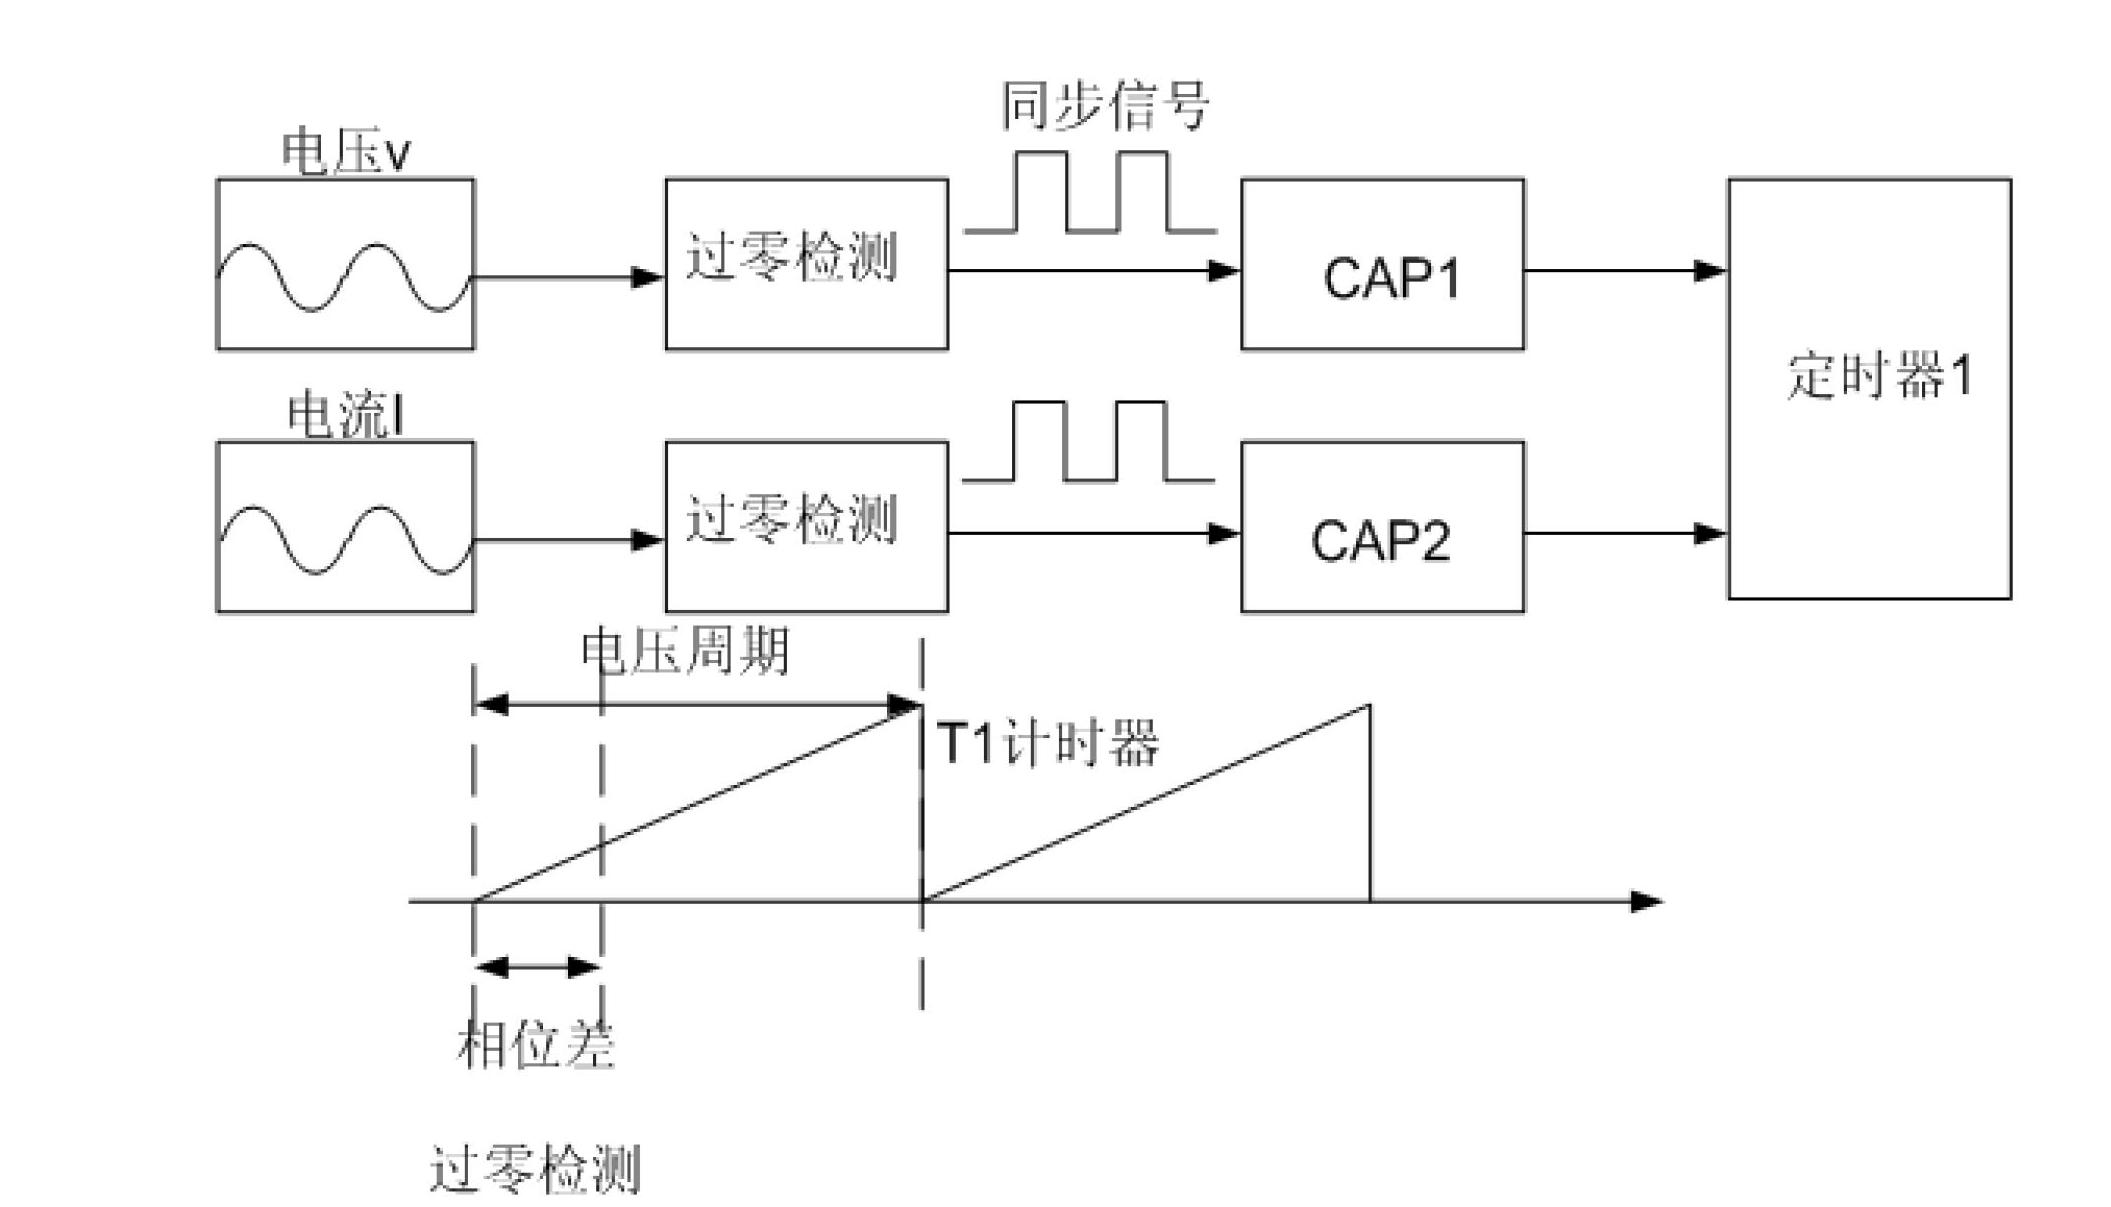 Contactless power transmission (CPT) resonance frequency device based on digital signal processor (DSP) phase lock technique